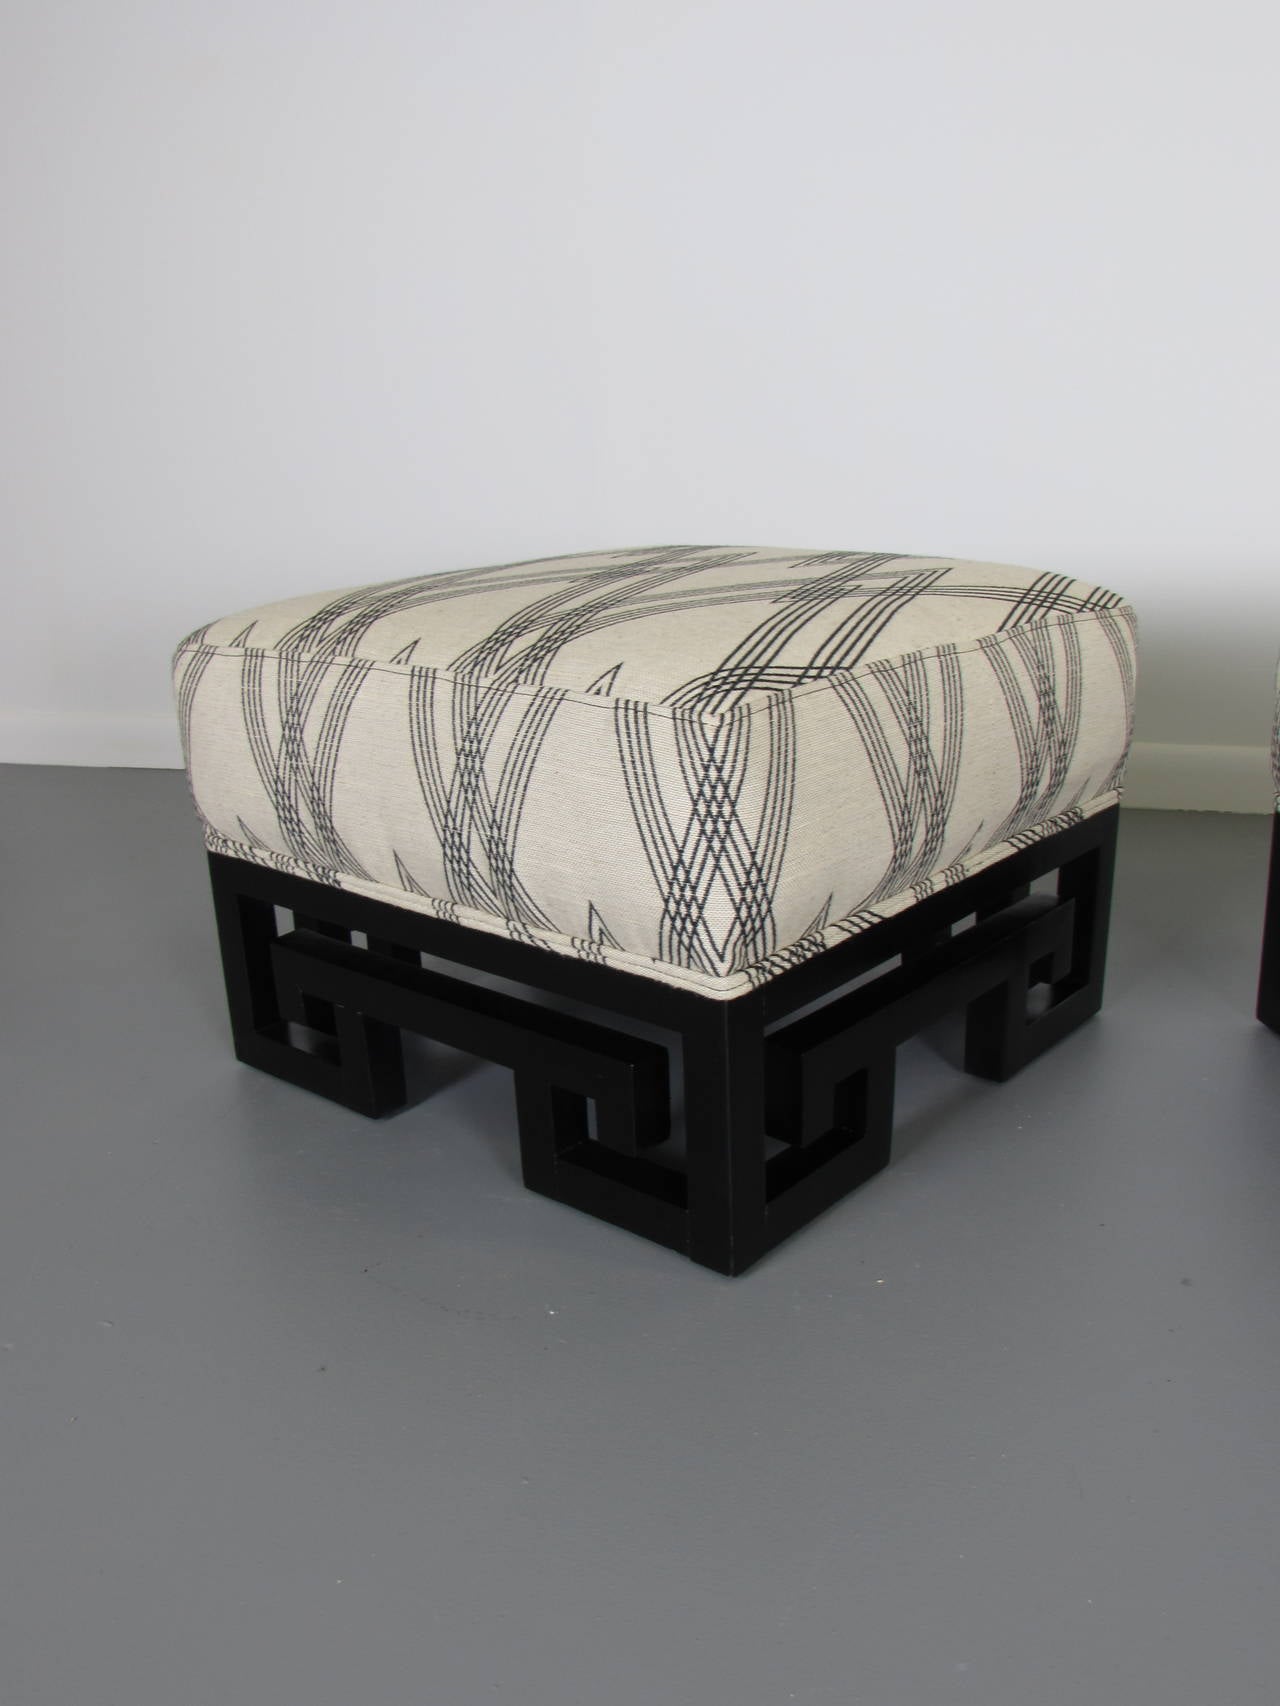 American Incredible Ottomans or Stools with Lacquered Greek Key Bases after James Mont